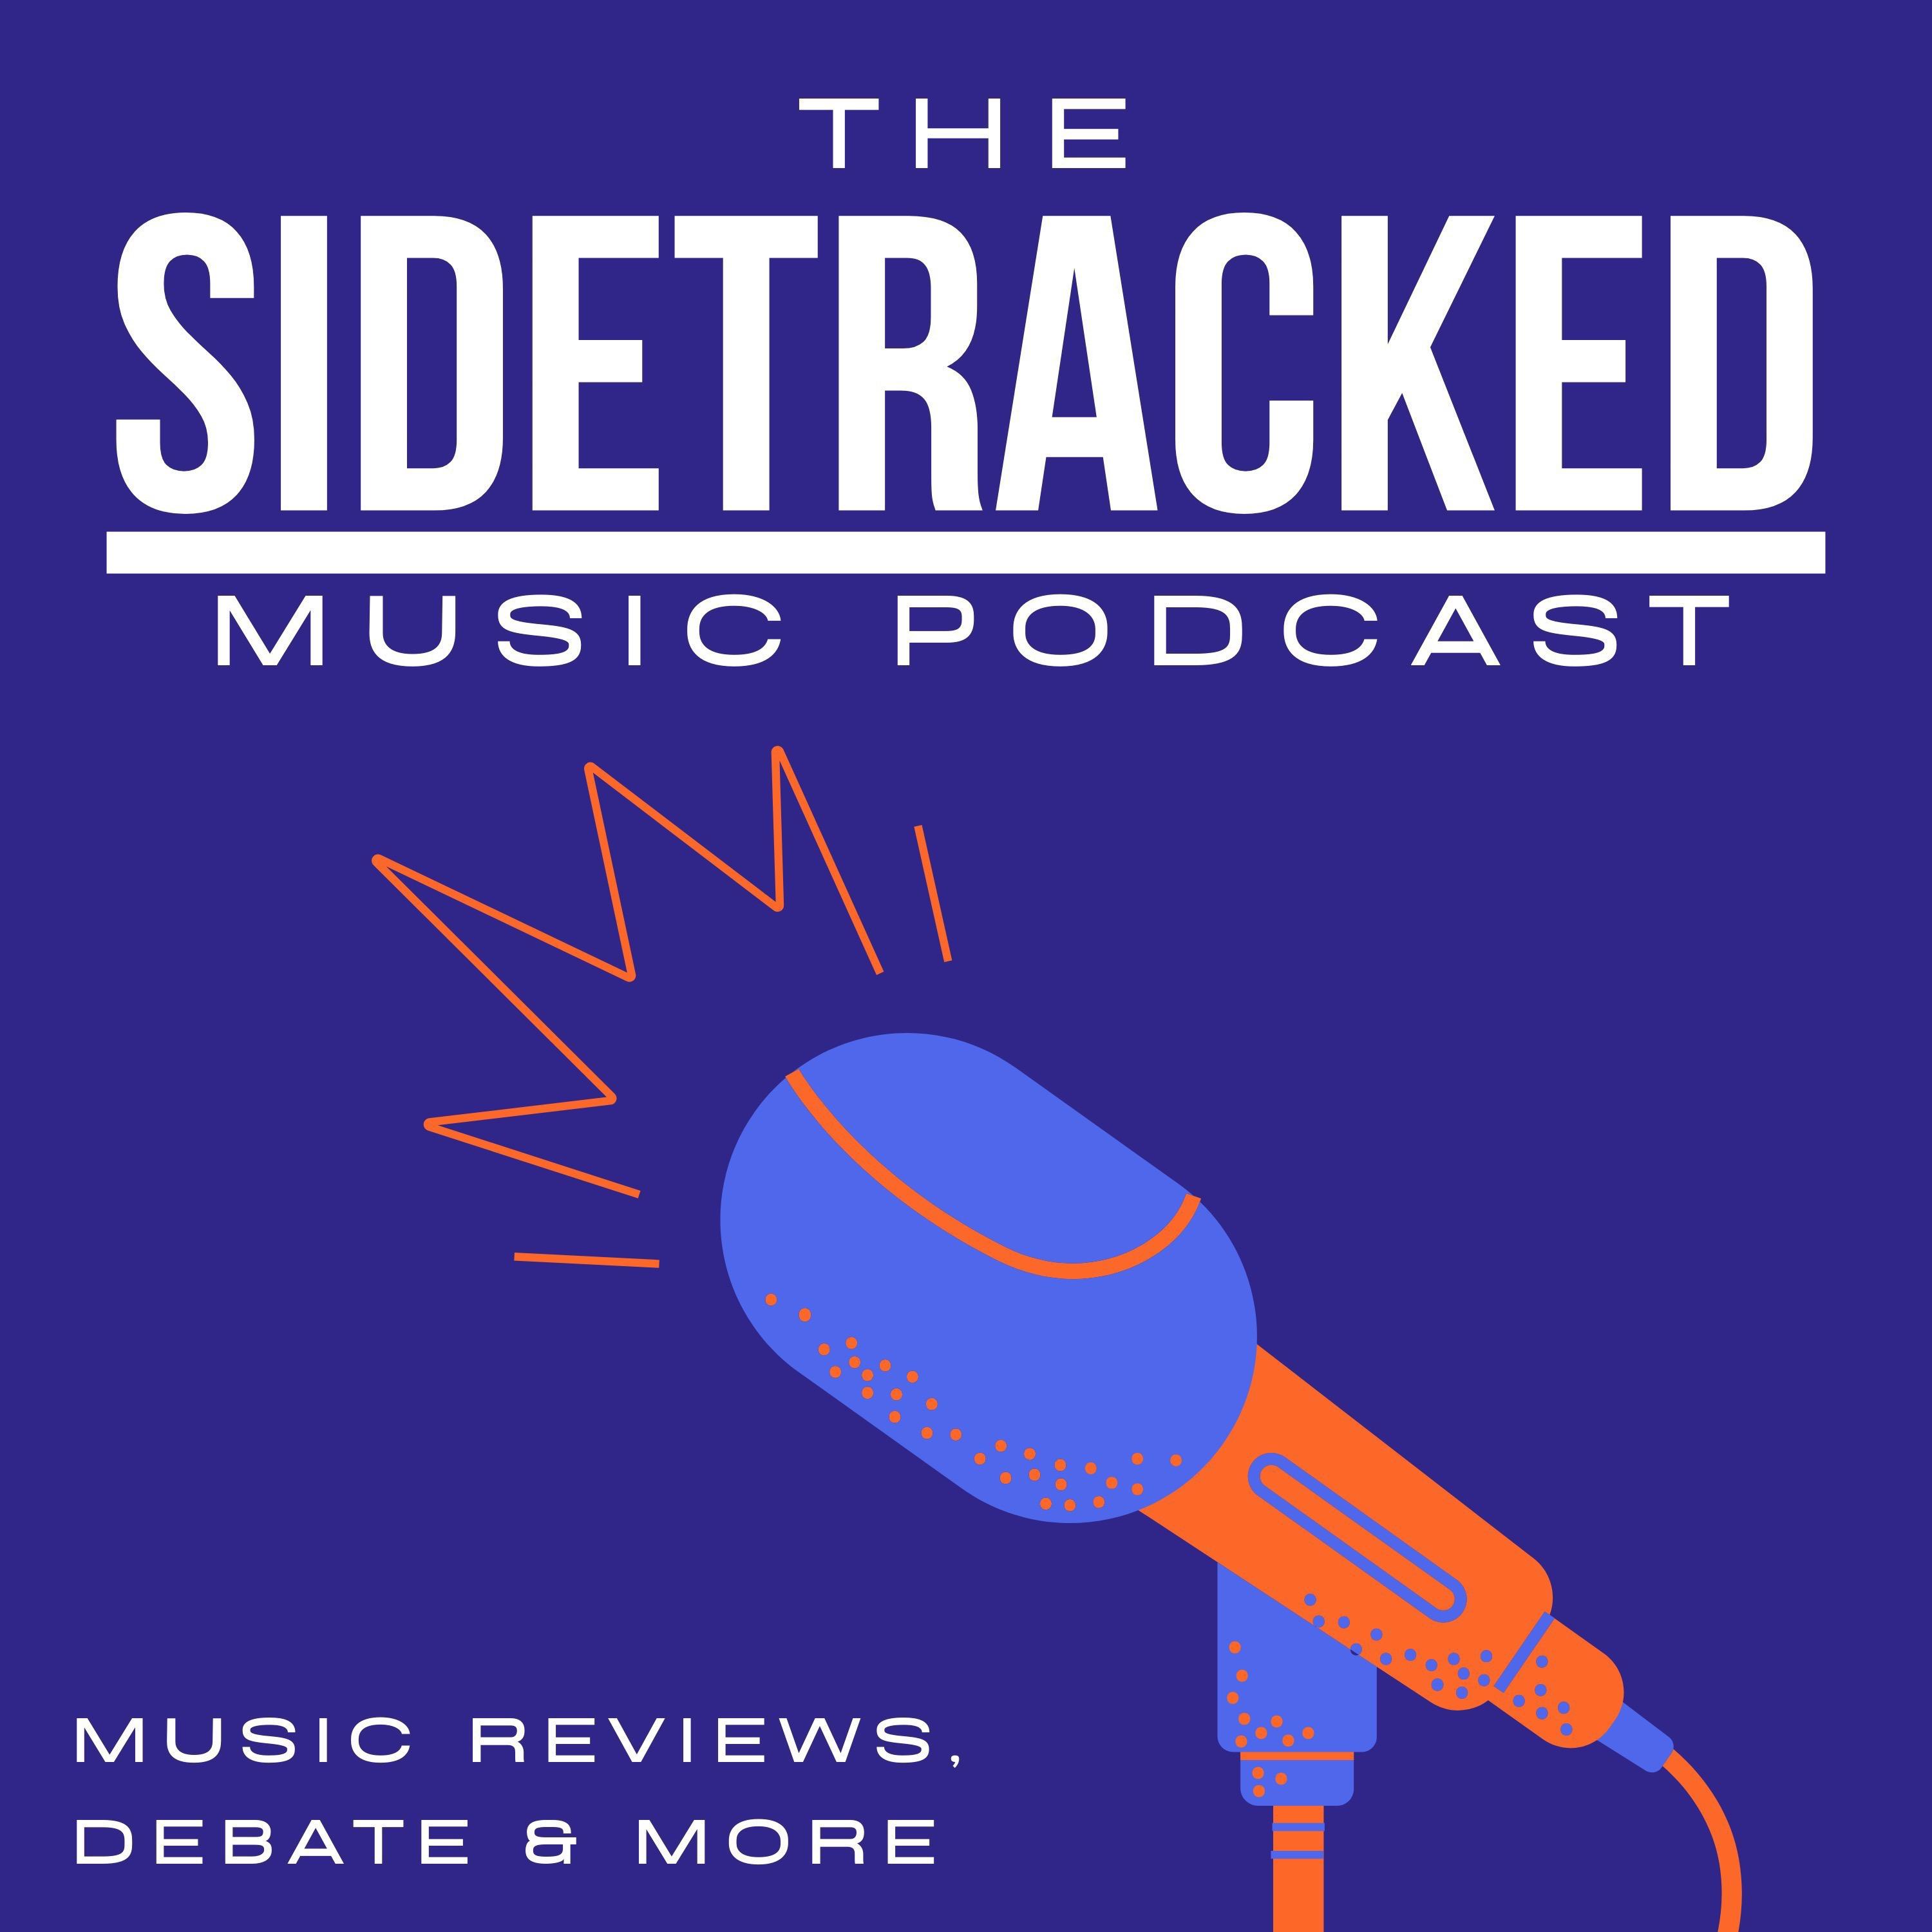 The Sidetracked Music Podcast